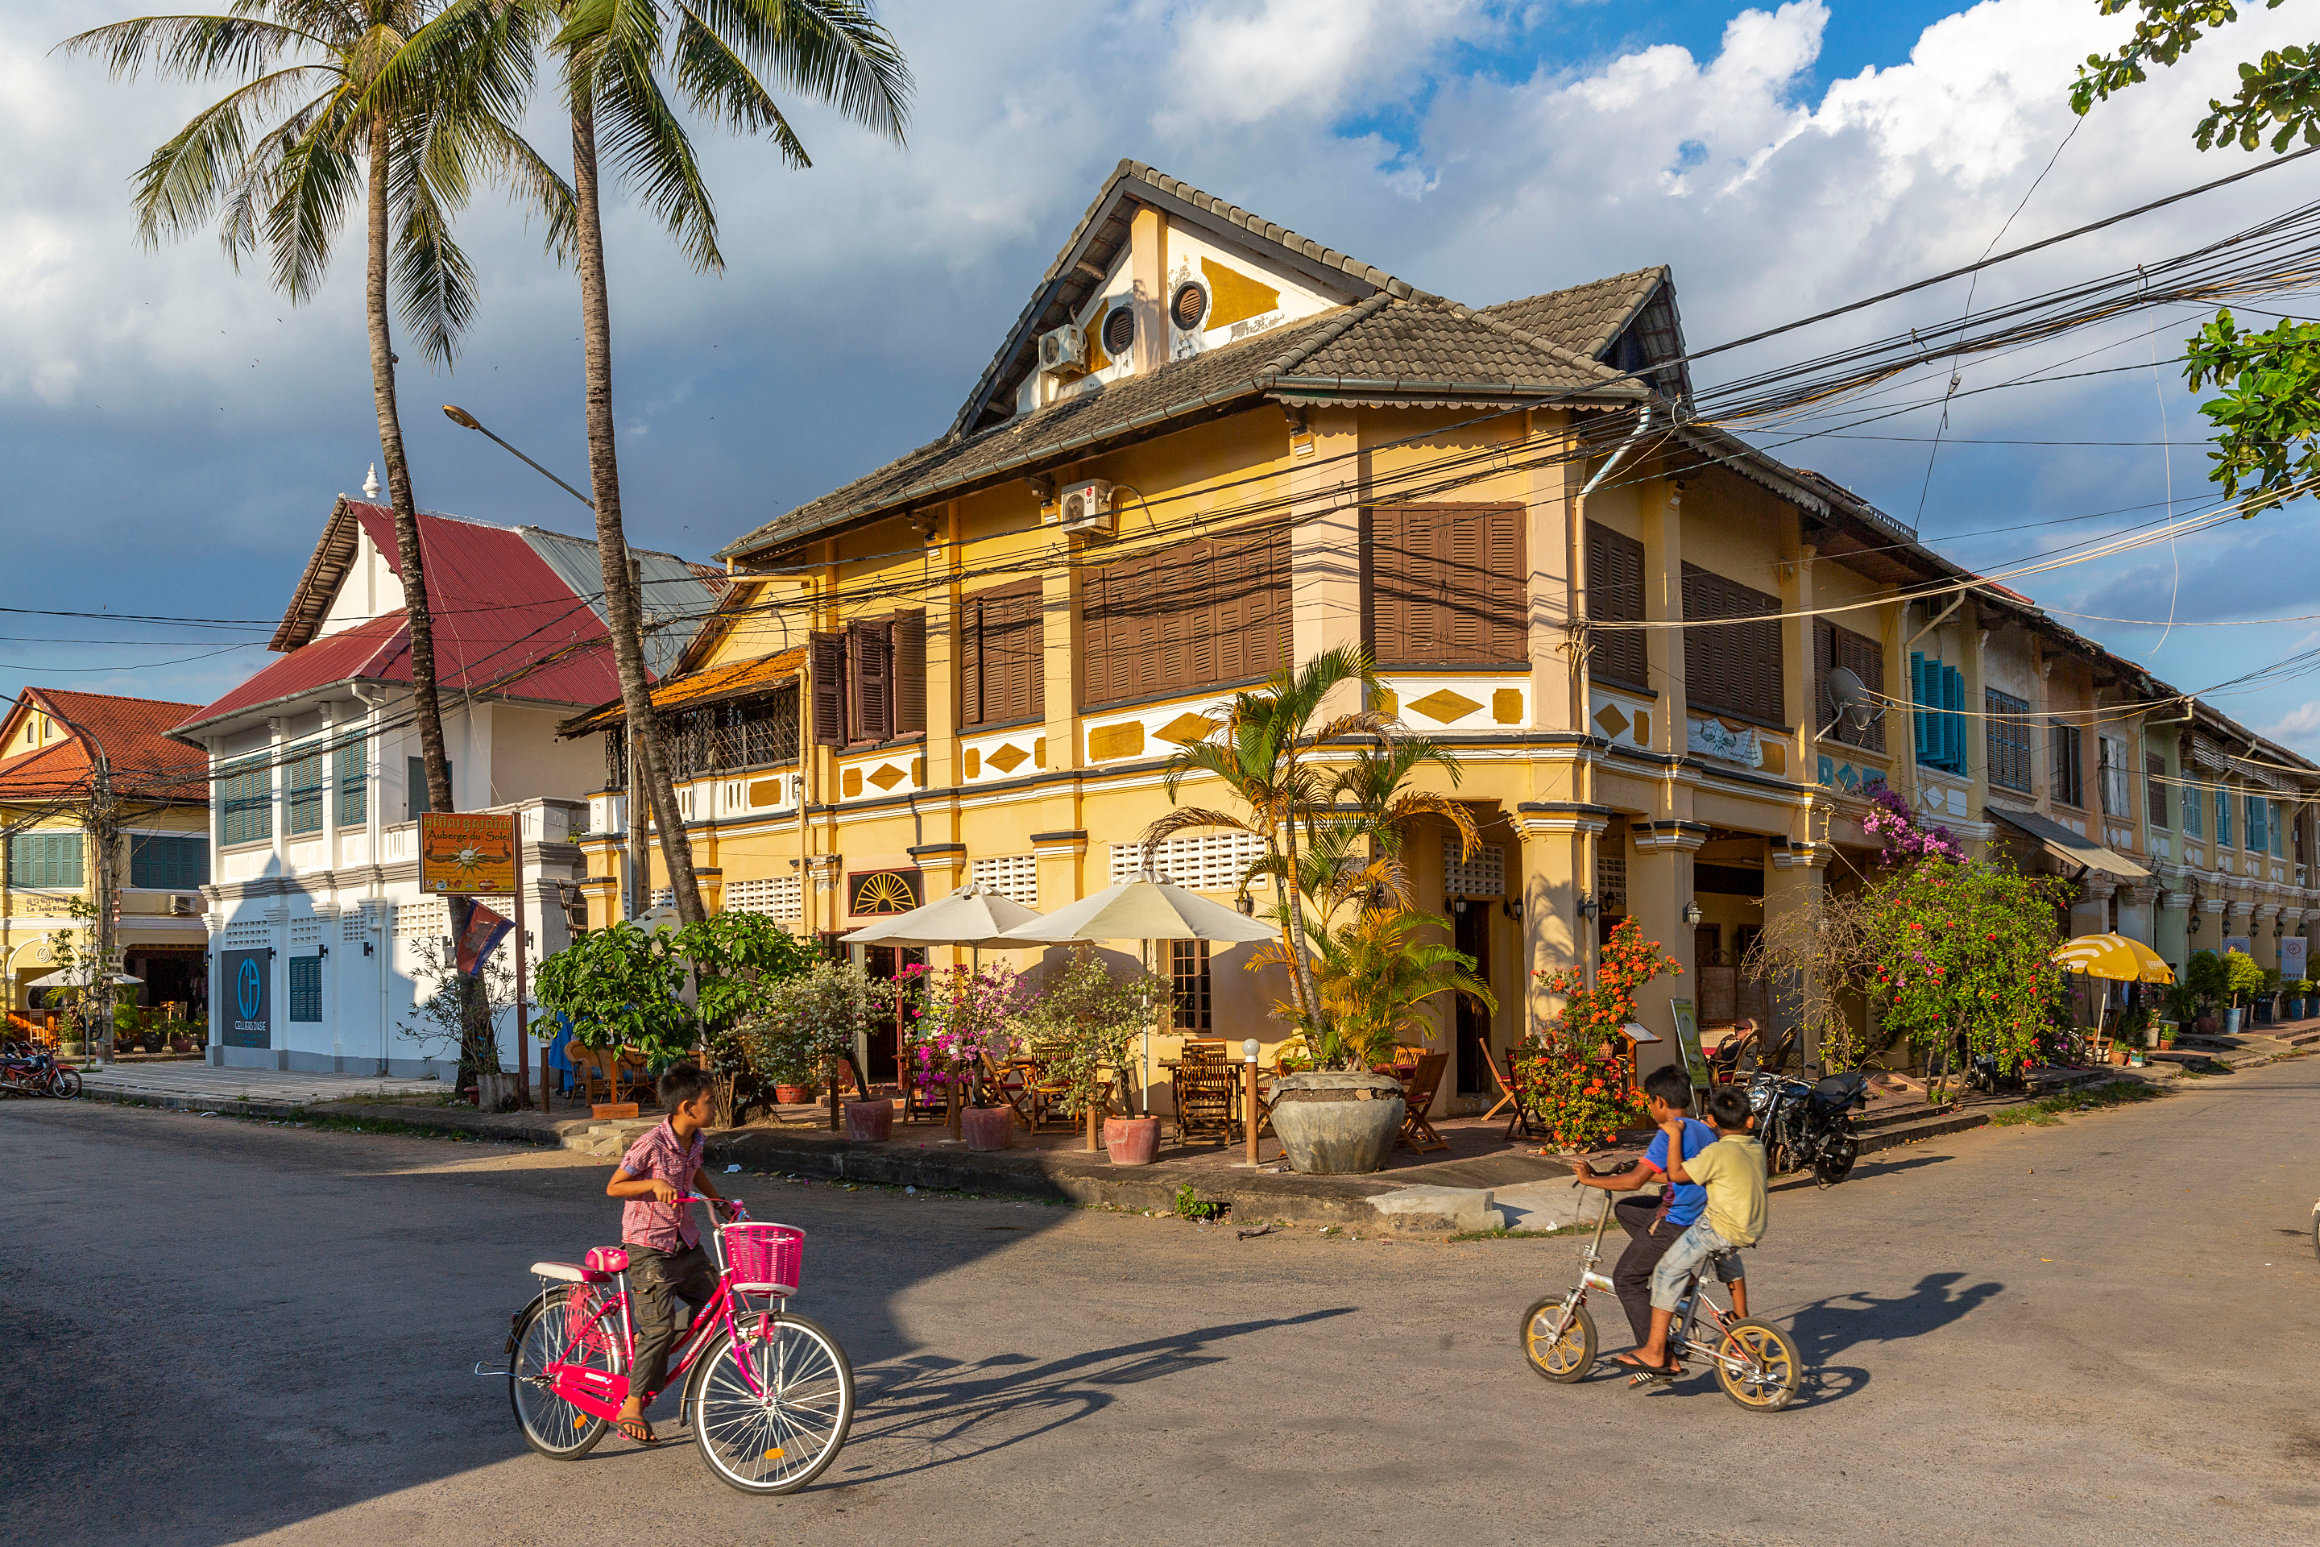 Charming colonial building and kids on bikes in Kampot, Cambodia